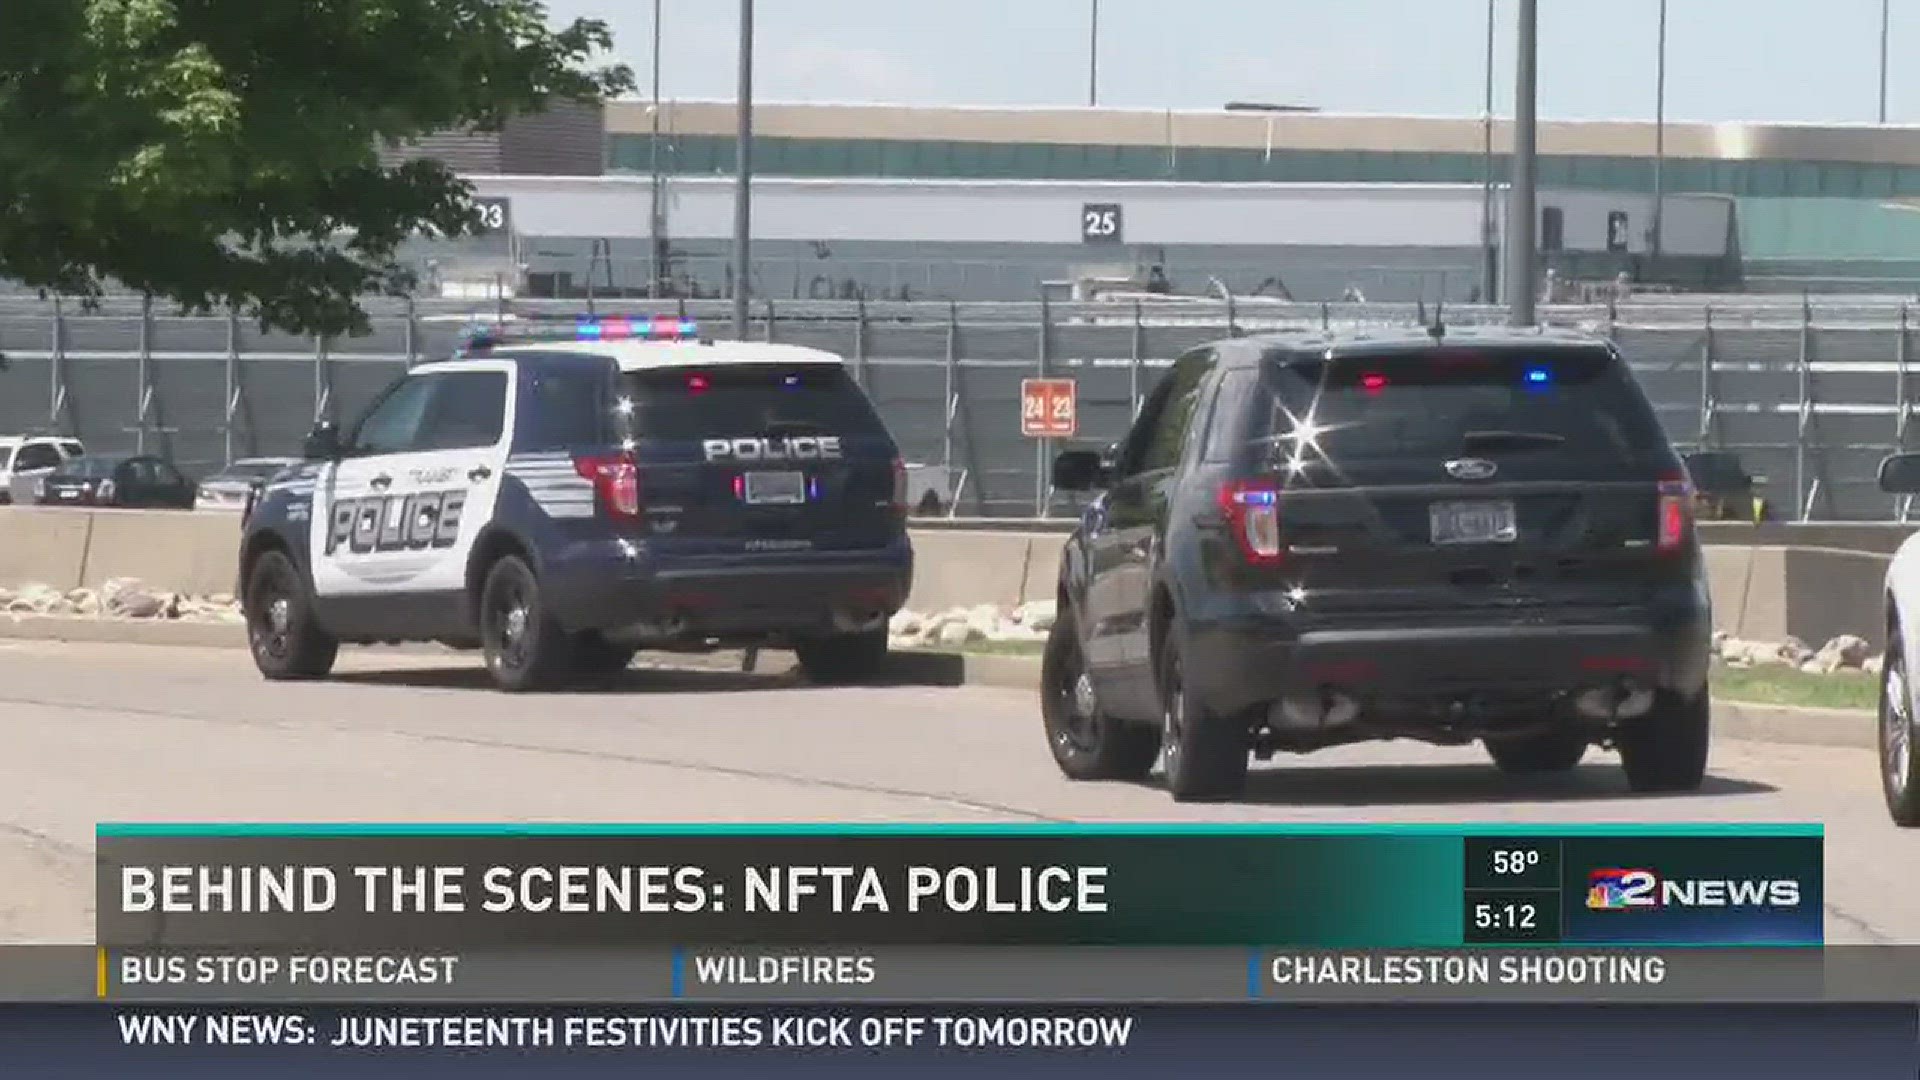 Behind the scenes with NFTA Police